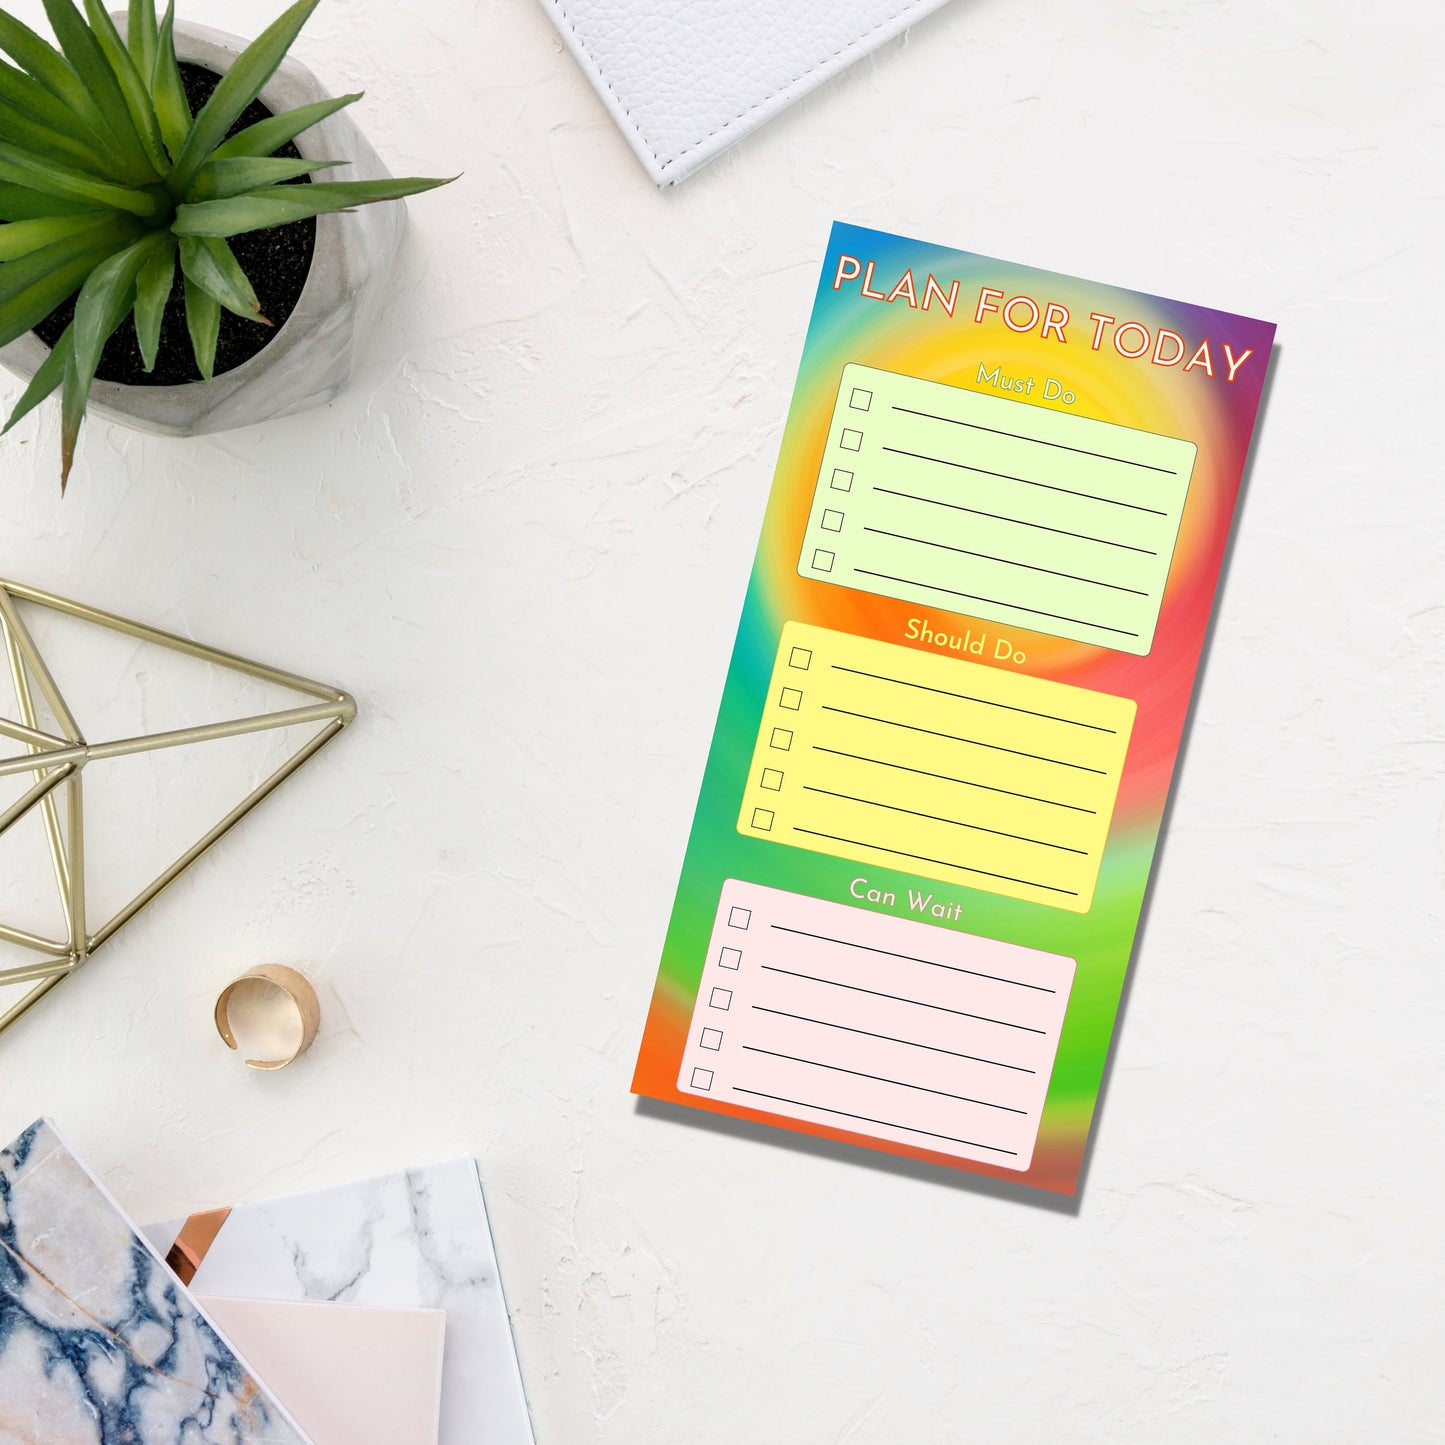 Adhd Planner | Adhd Magnetic Notepad | Simple Adhd Plan For The Day